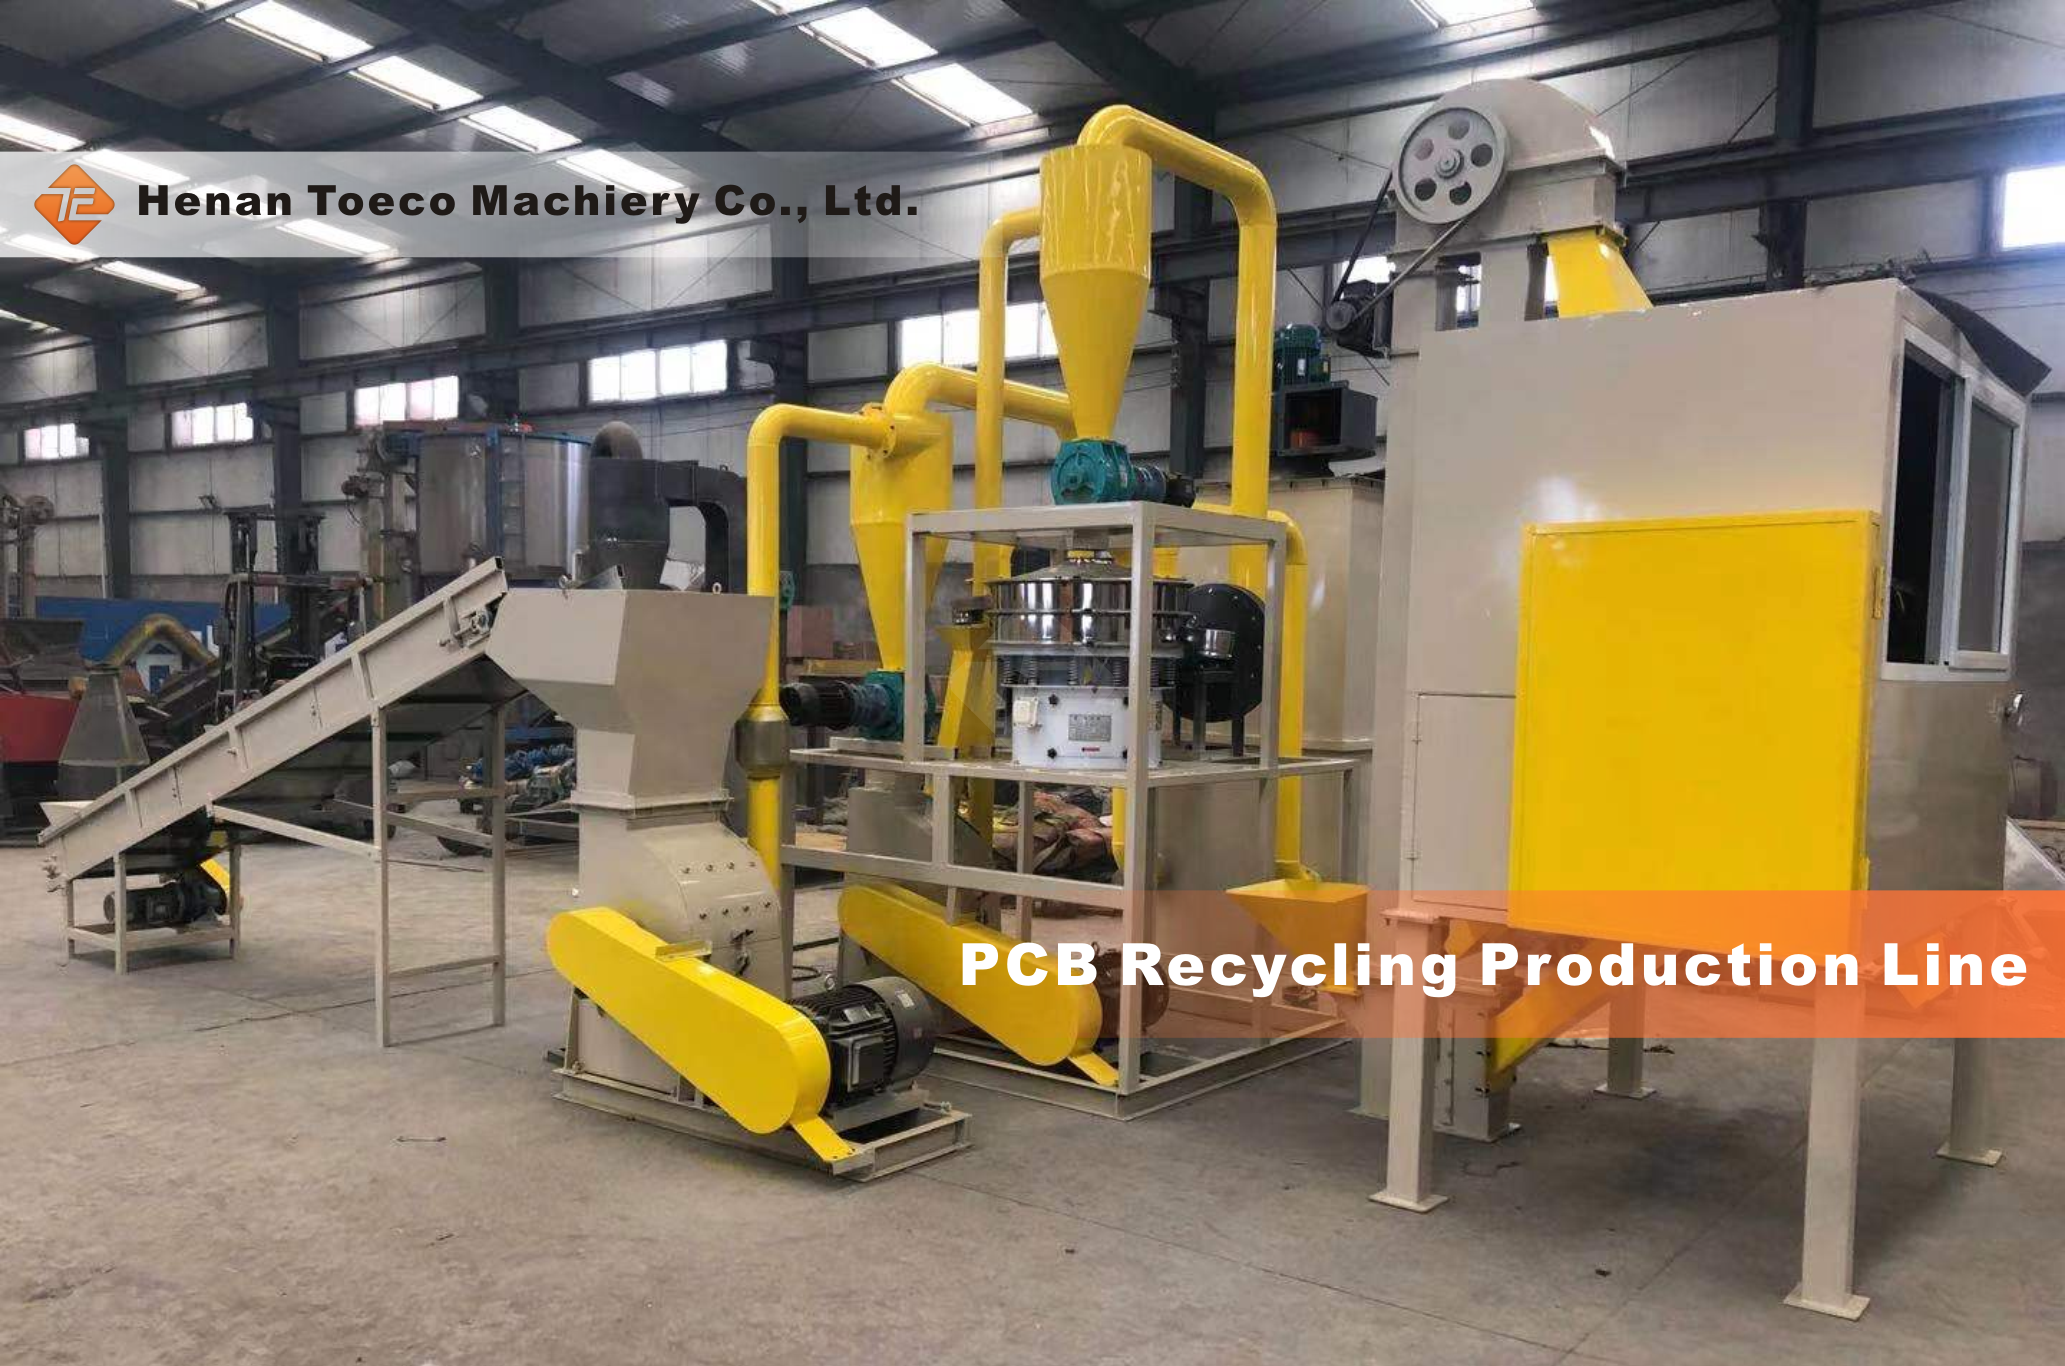 PCB Recycling Production Line